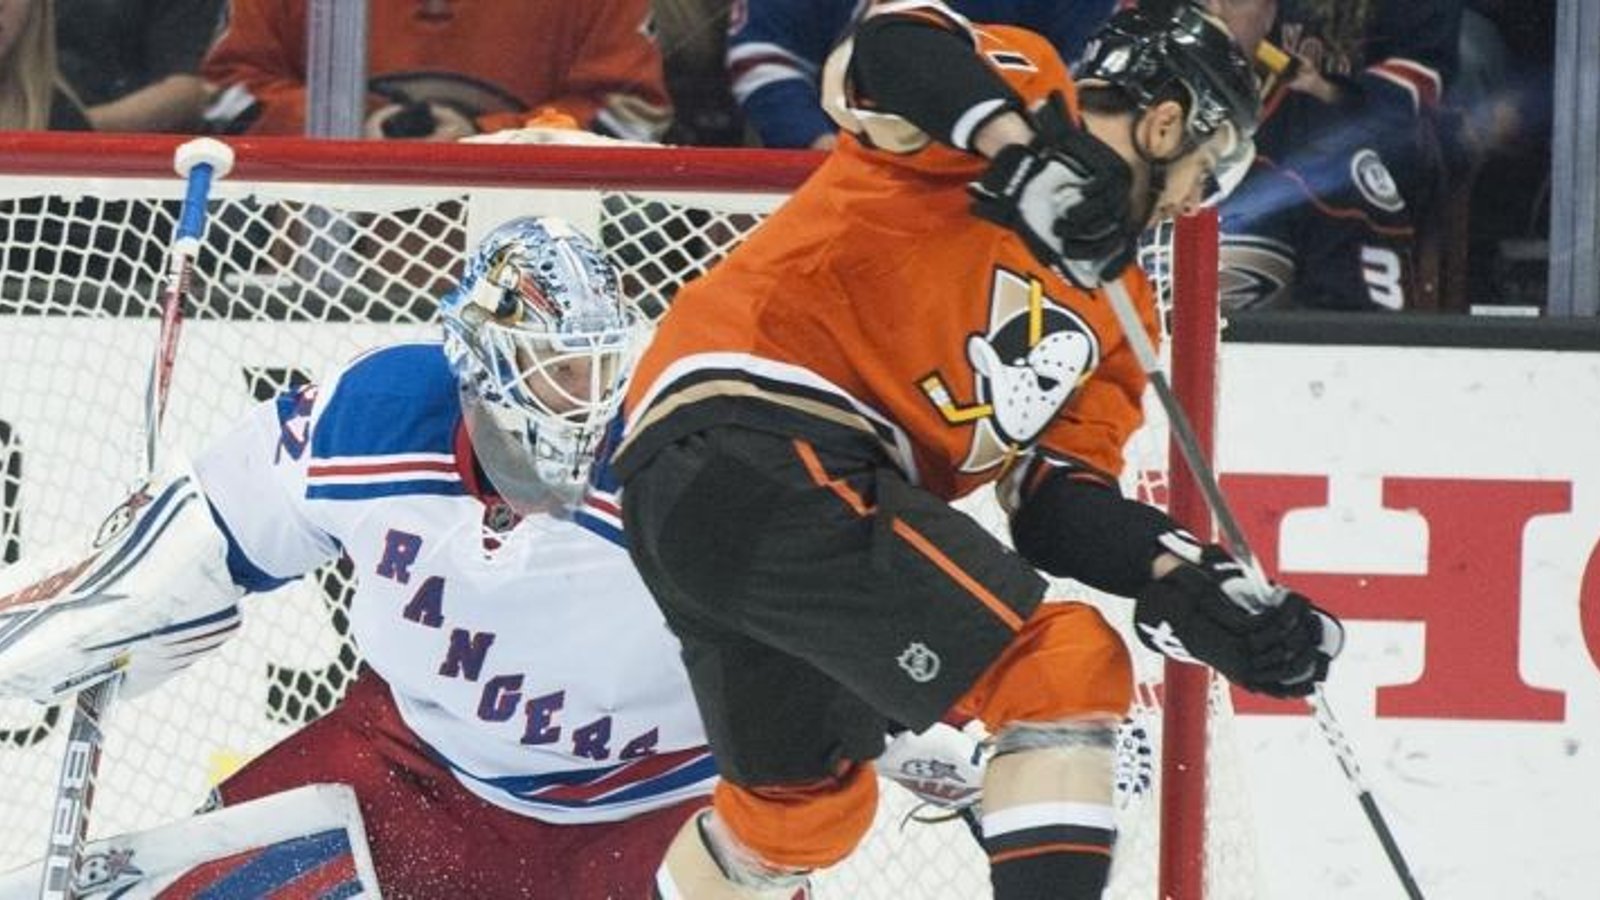 Report: Rangers sign young center to very reasonable deal.